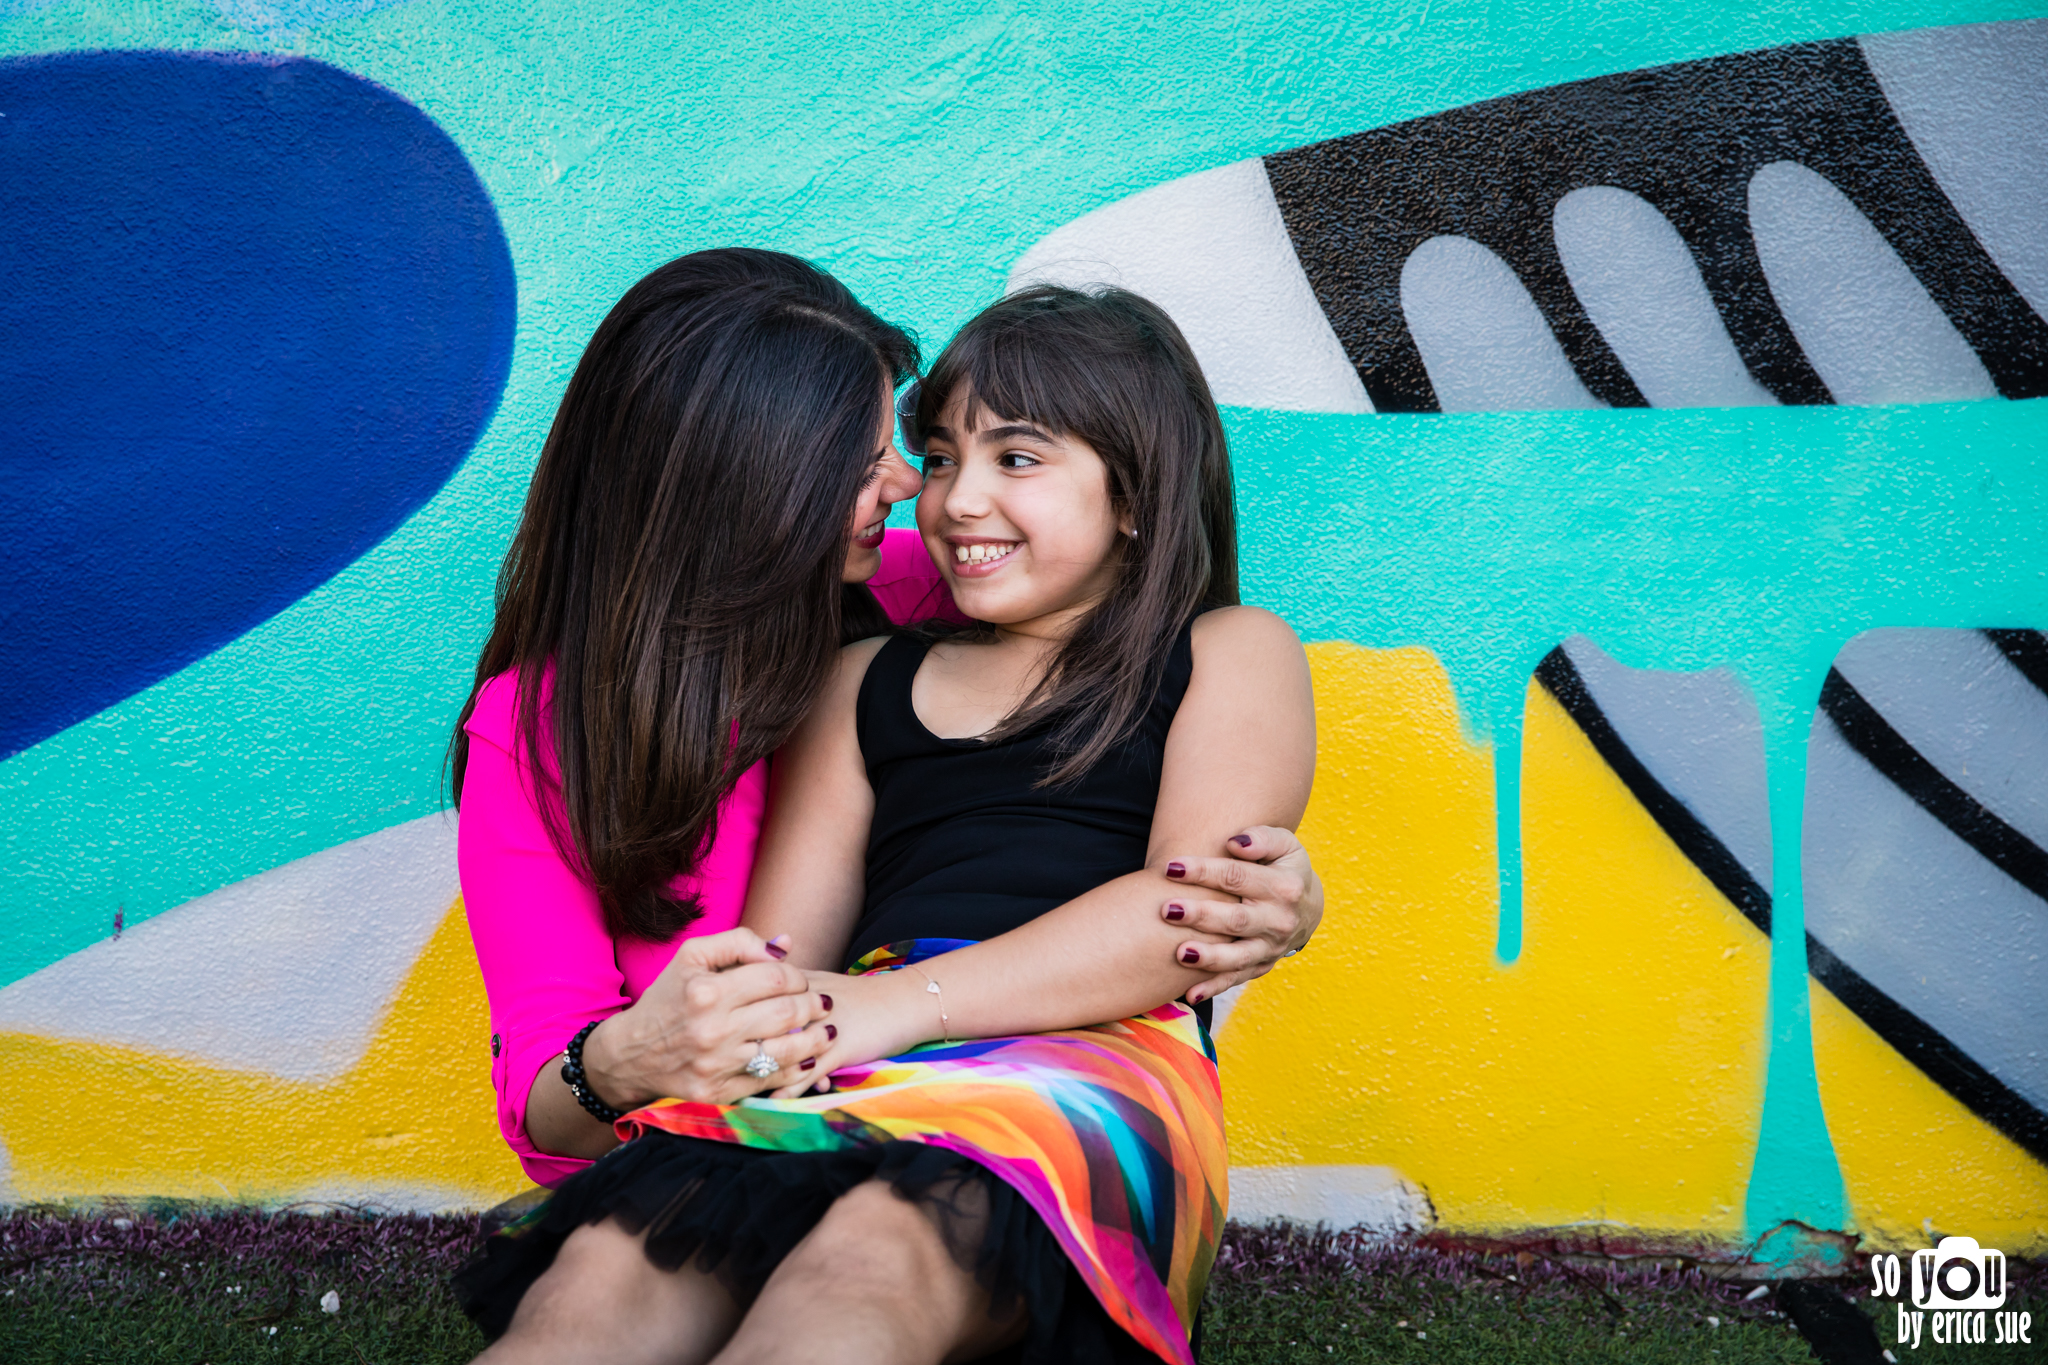 so-you-by-erica-sue-family-photographer-miami-fl-wynwood-mother-daughter-3240.jpg